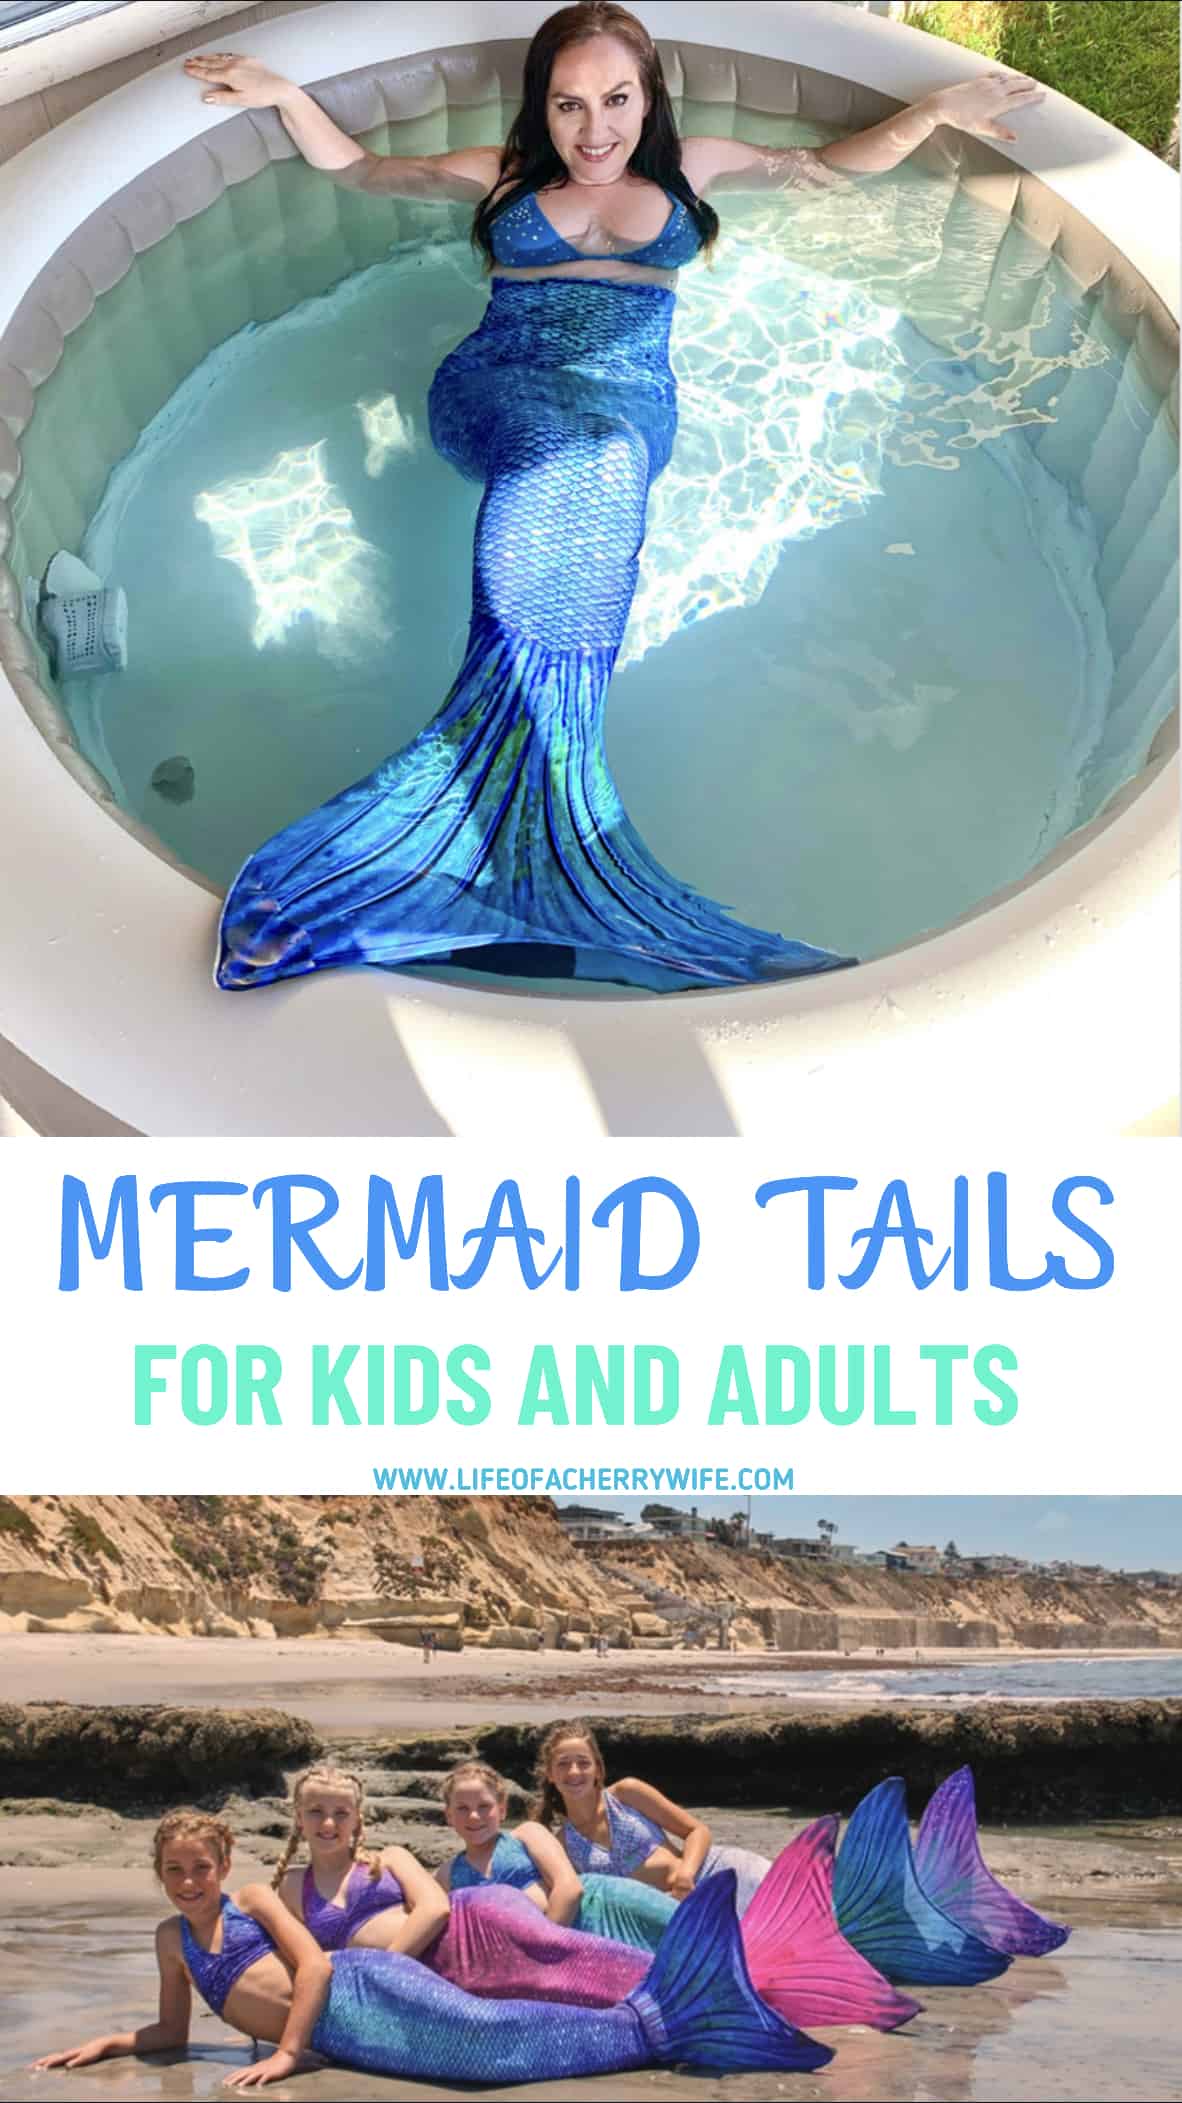 Mermaid tails for kids and adults